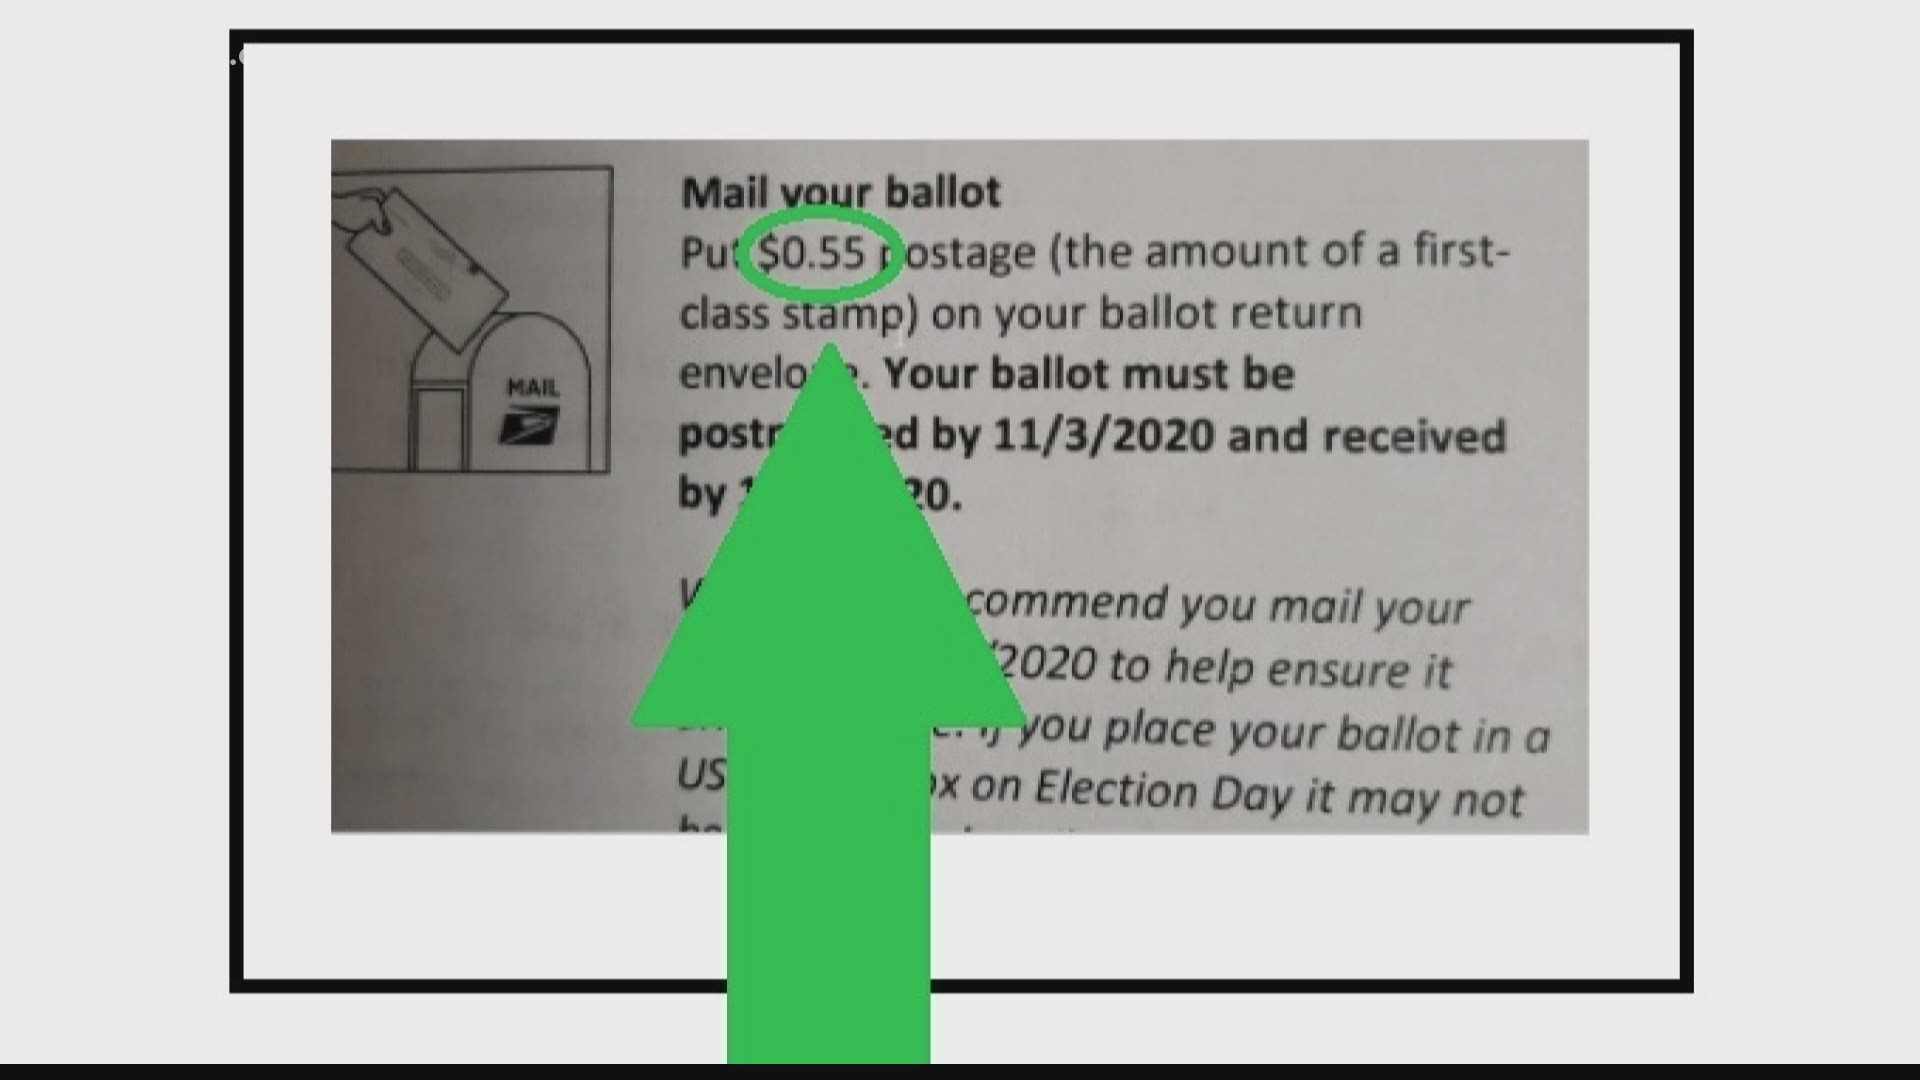 A legitimate ballot envelope with prepaid postage won't be processed as bulk. In fact, it must be first-class mail and have a proper $.55 stamp.